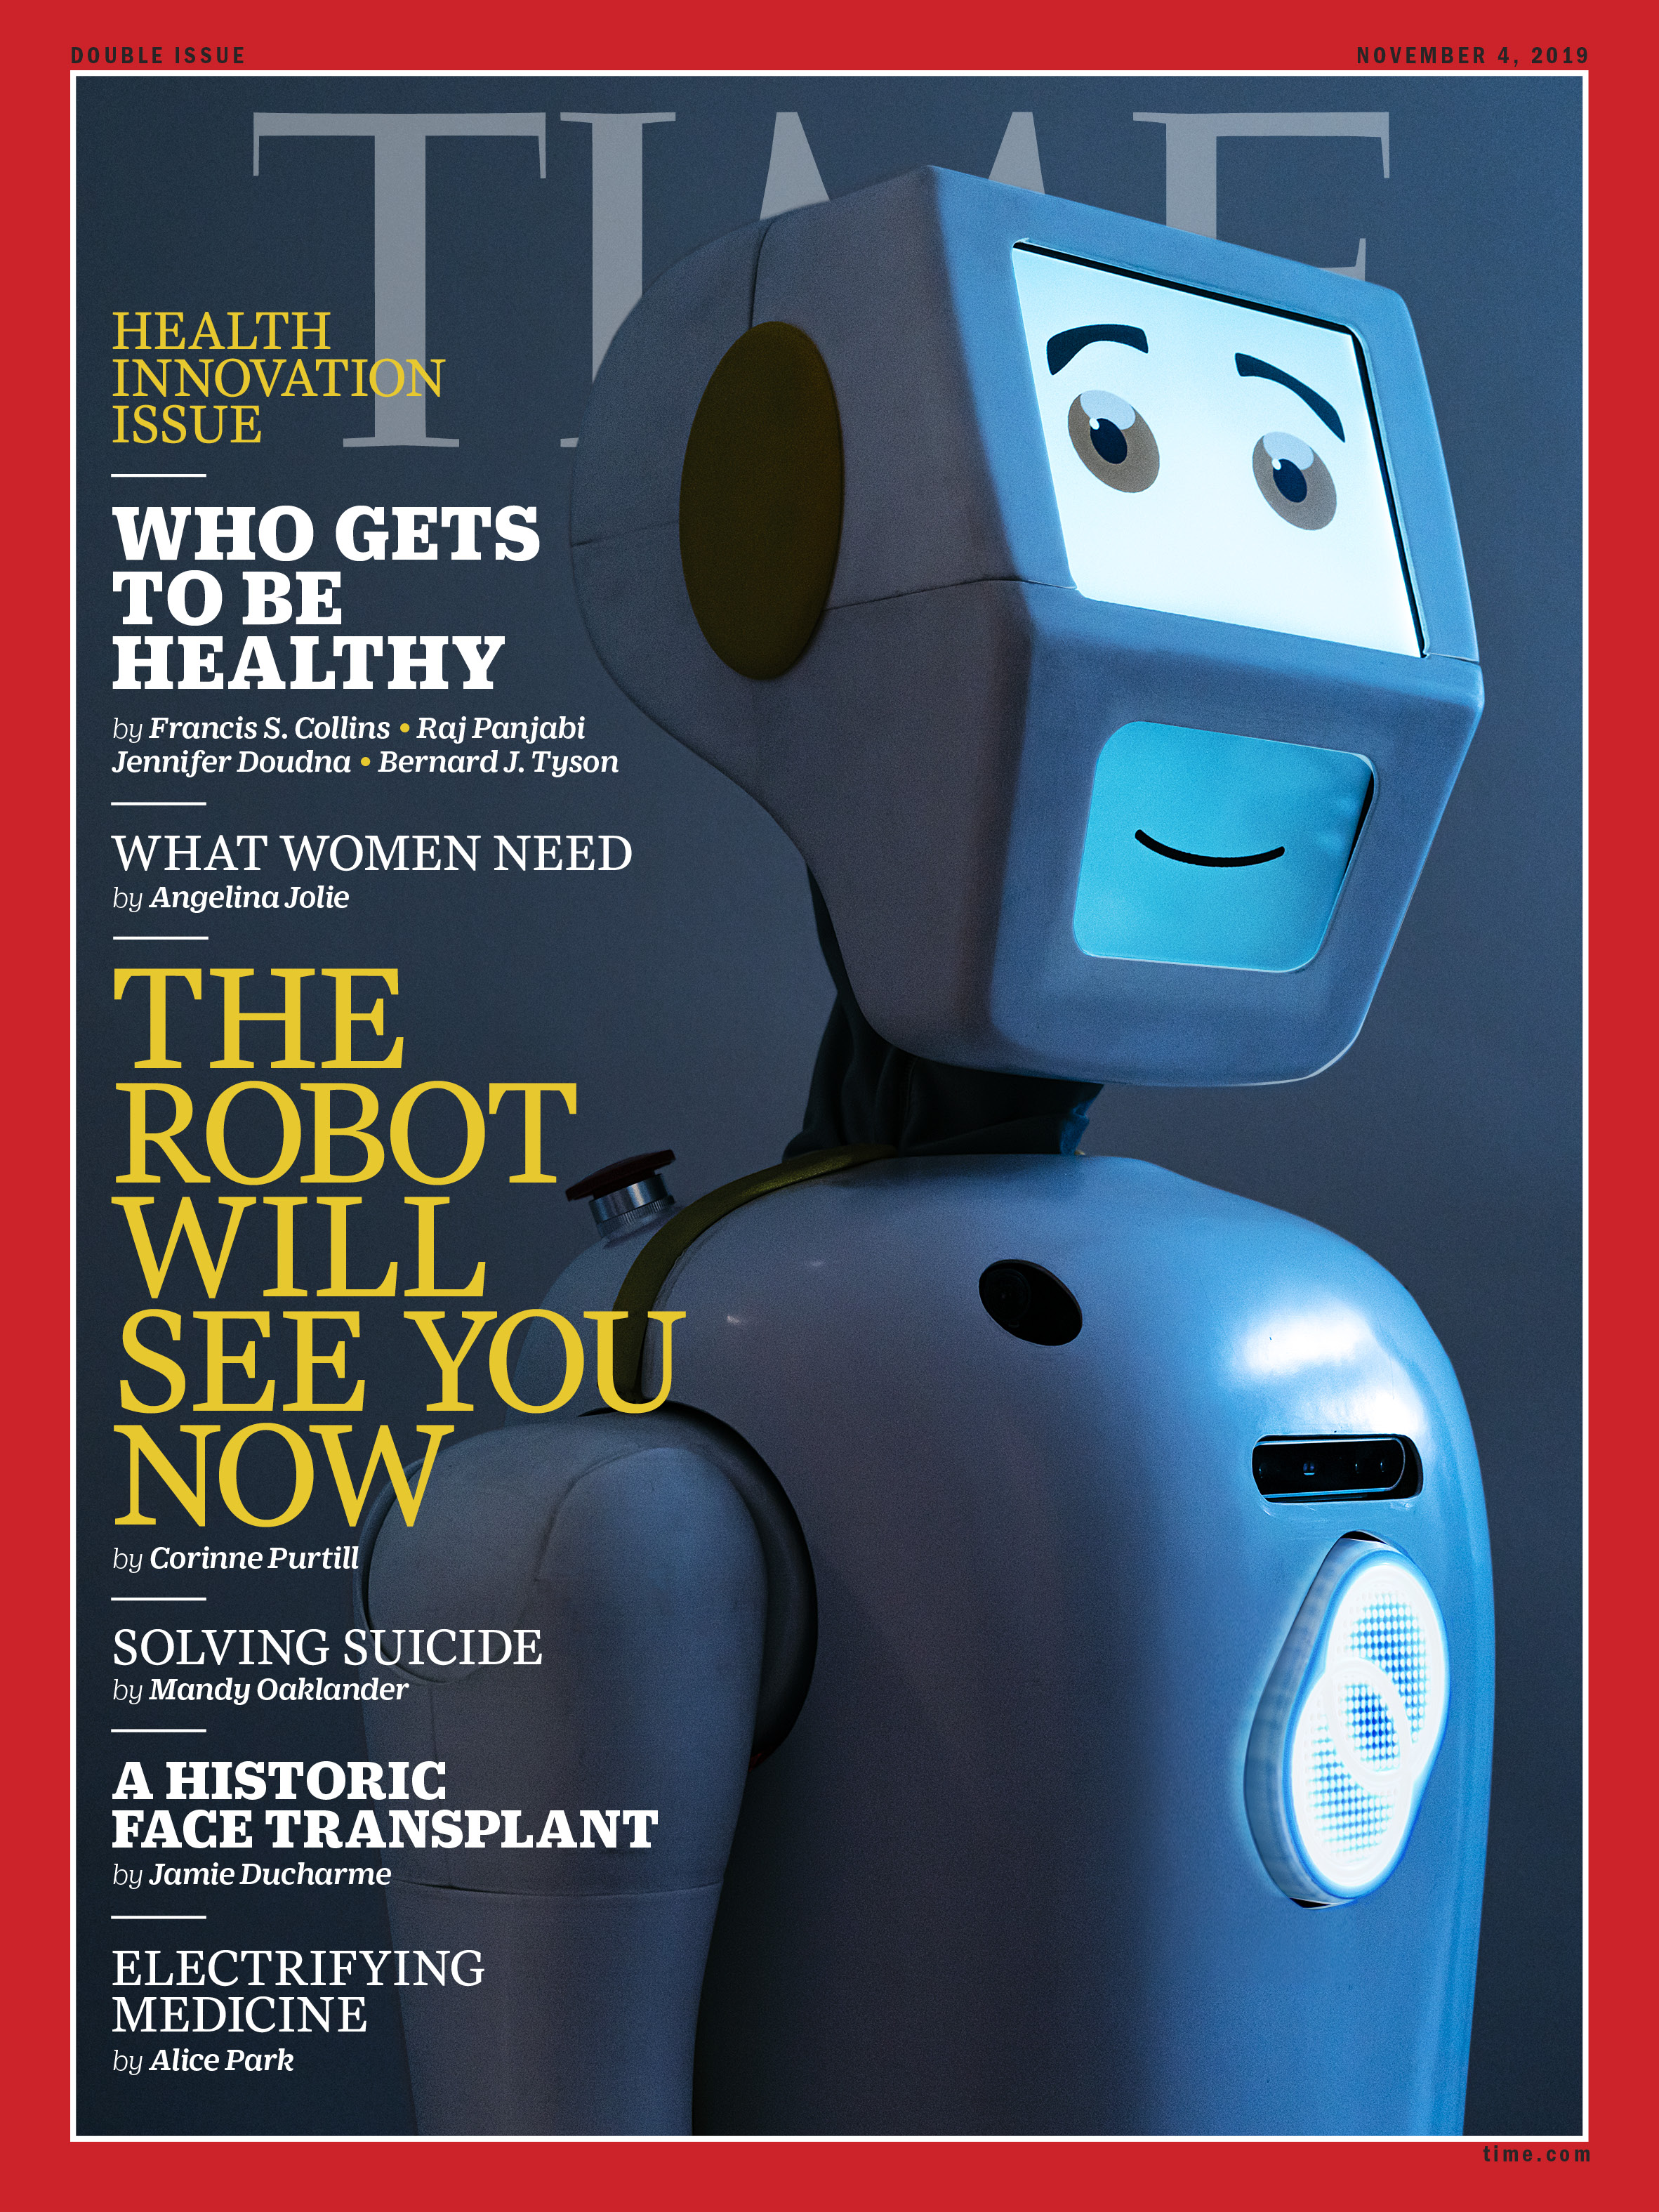 Health Innovation Issue Time Magazine cover